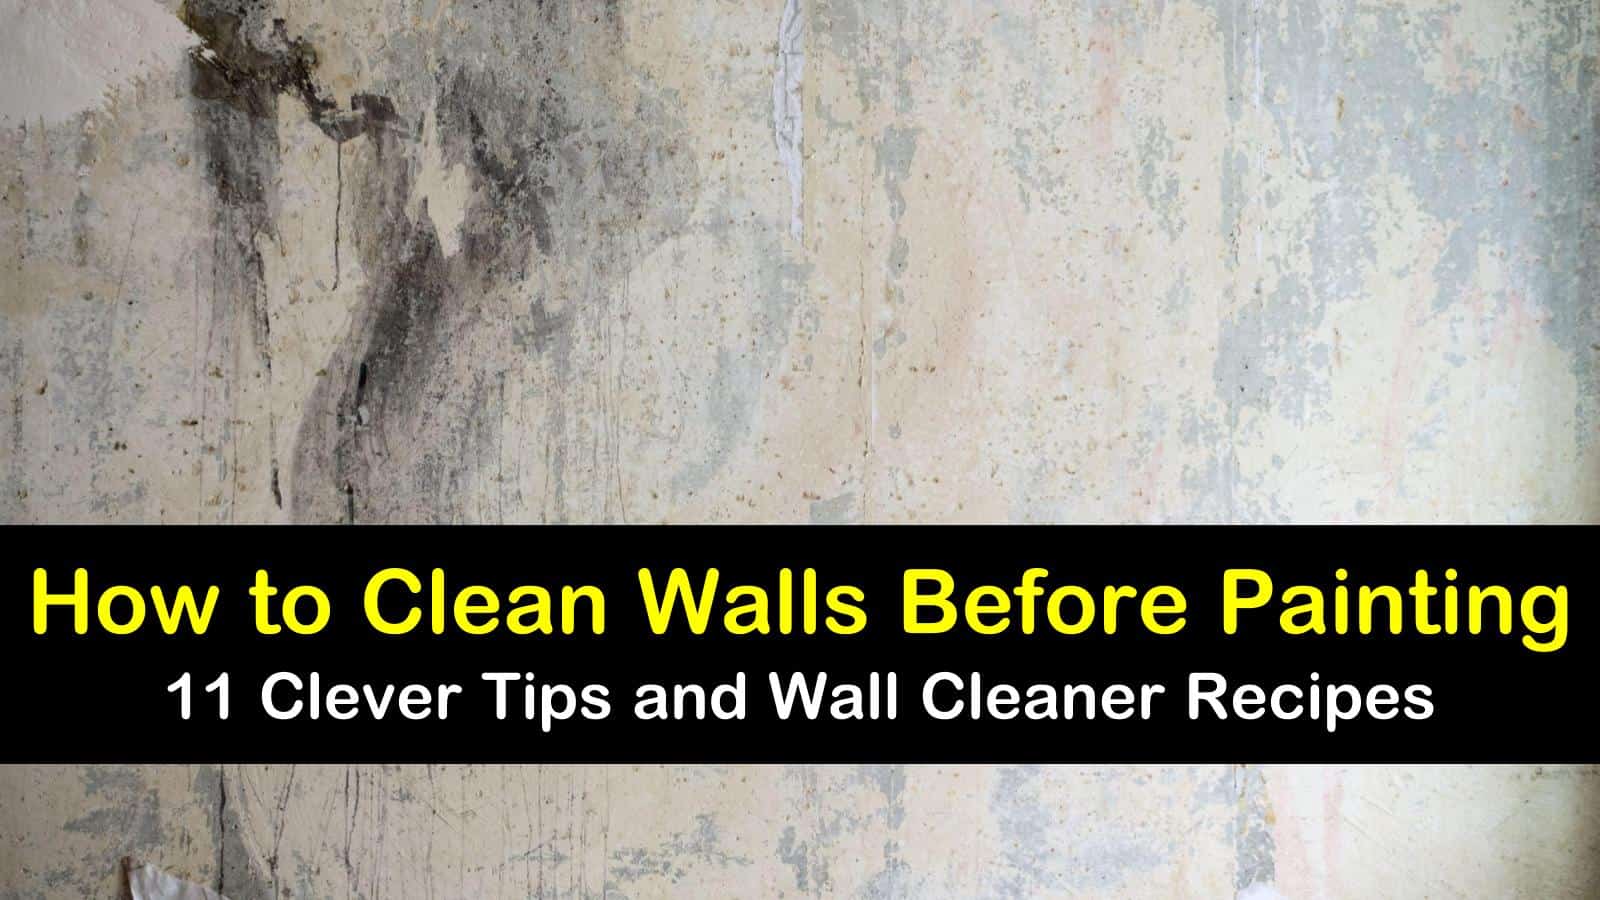 How To Clean Walls Before Painting - 11 Clever Tips And Wall Cleaner Recipes